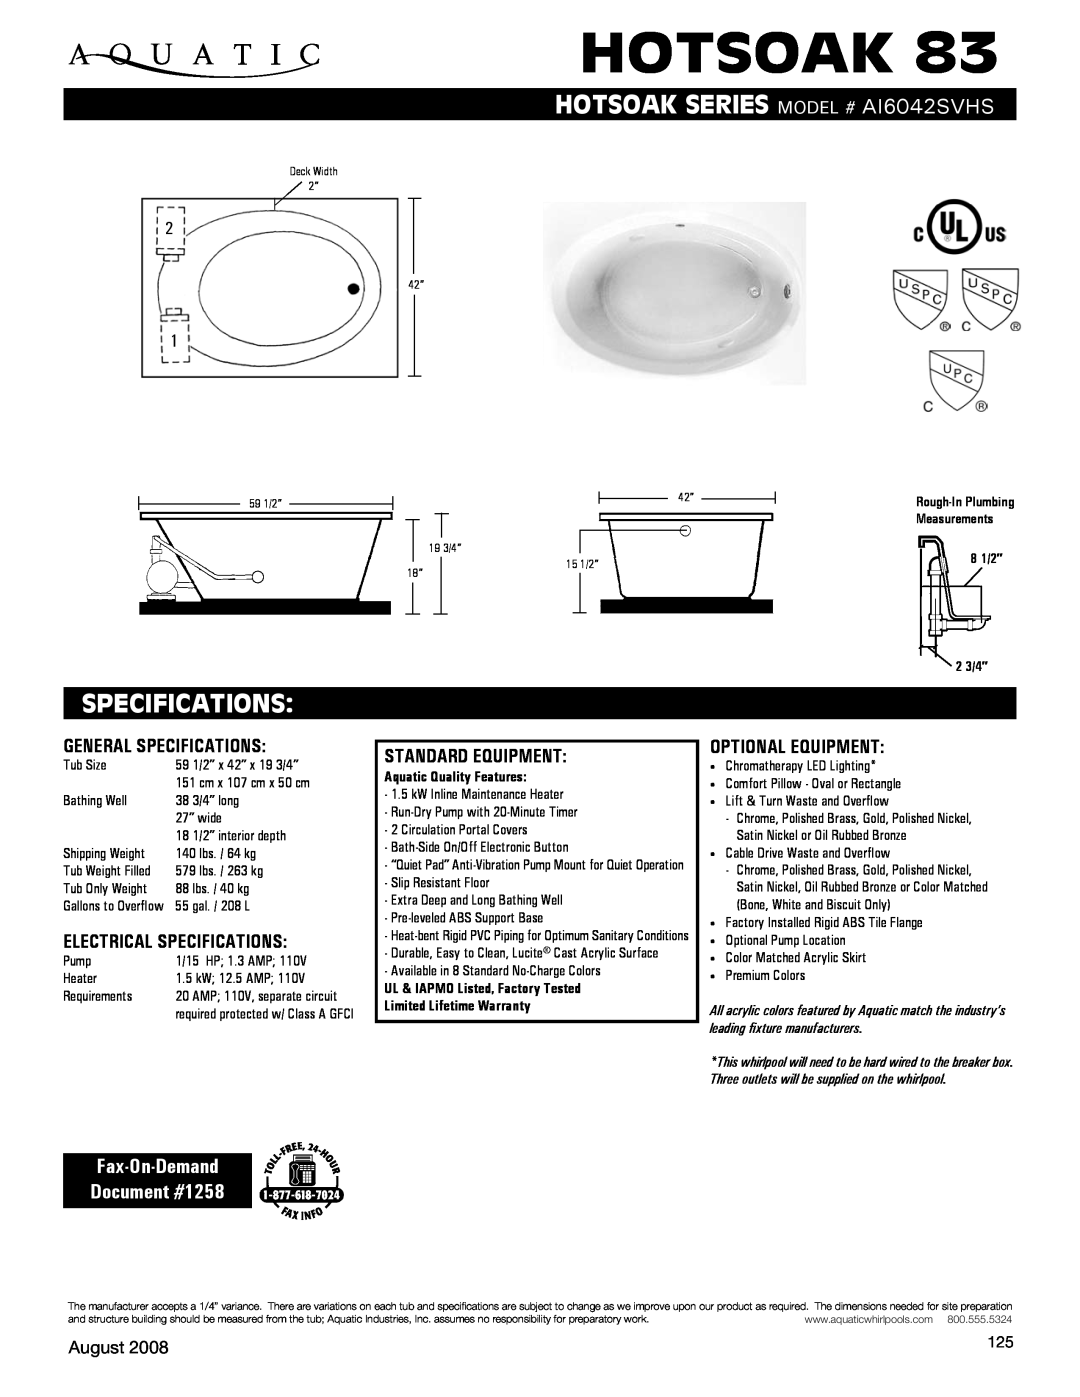 Aquatic specifications hotsoak series Model # ai6042SvHS, Specifications, Fax-On-Demand Document #1258, August 